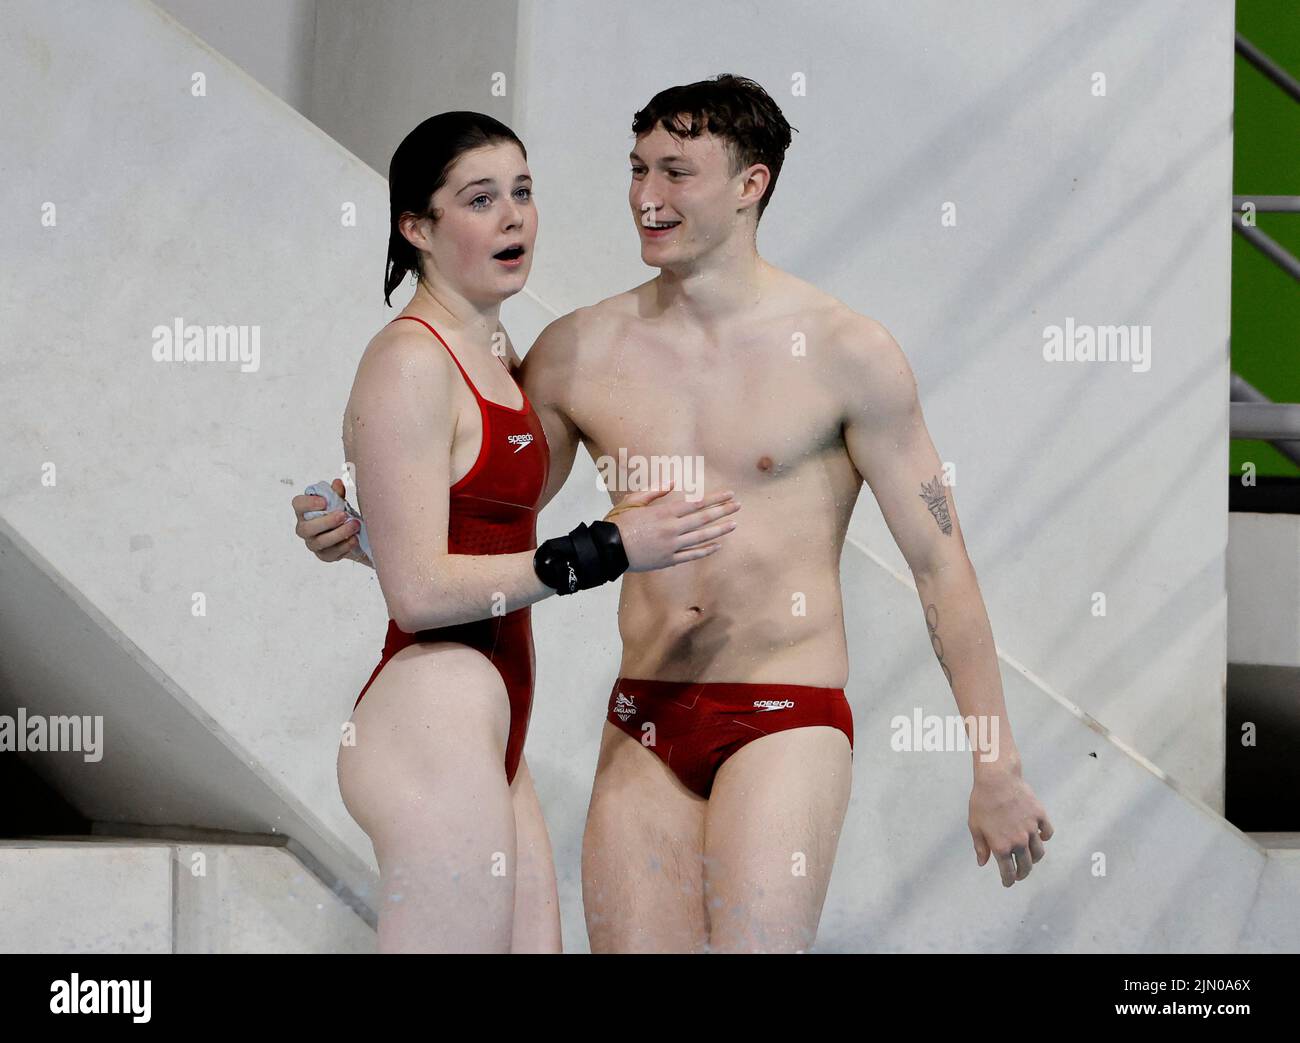 Commonwealth Games - Diving - Mixed Synchronised 10m Platform - Final - Sandwell Aquatics Centre, Birmingham, Britain - August 8, 2022 England's Noah Oliver Williams and Andrea Spendolini Sirieix celebrate after winning gold REUTERS/Stefan Wermuth Stock Photo